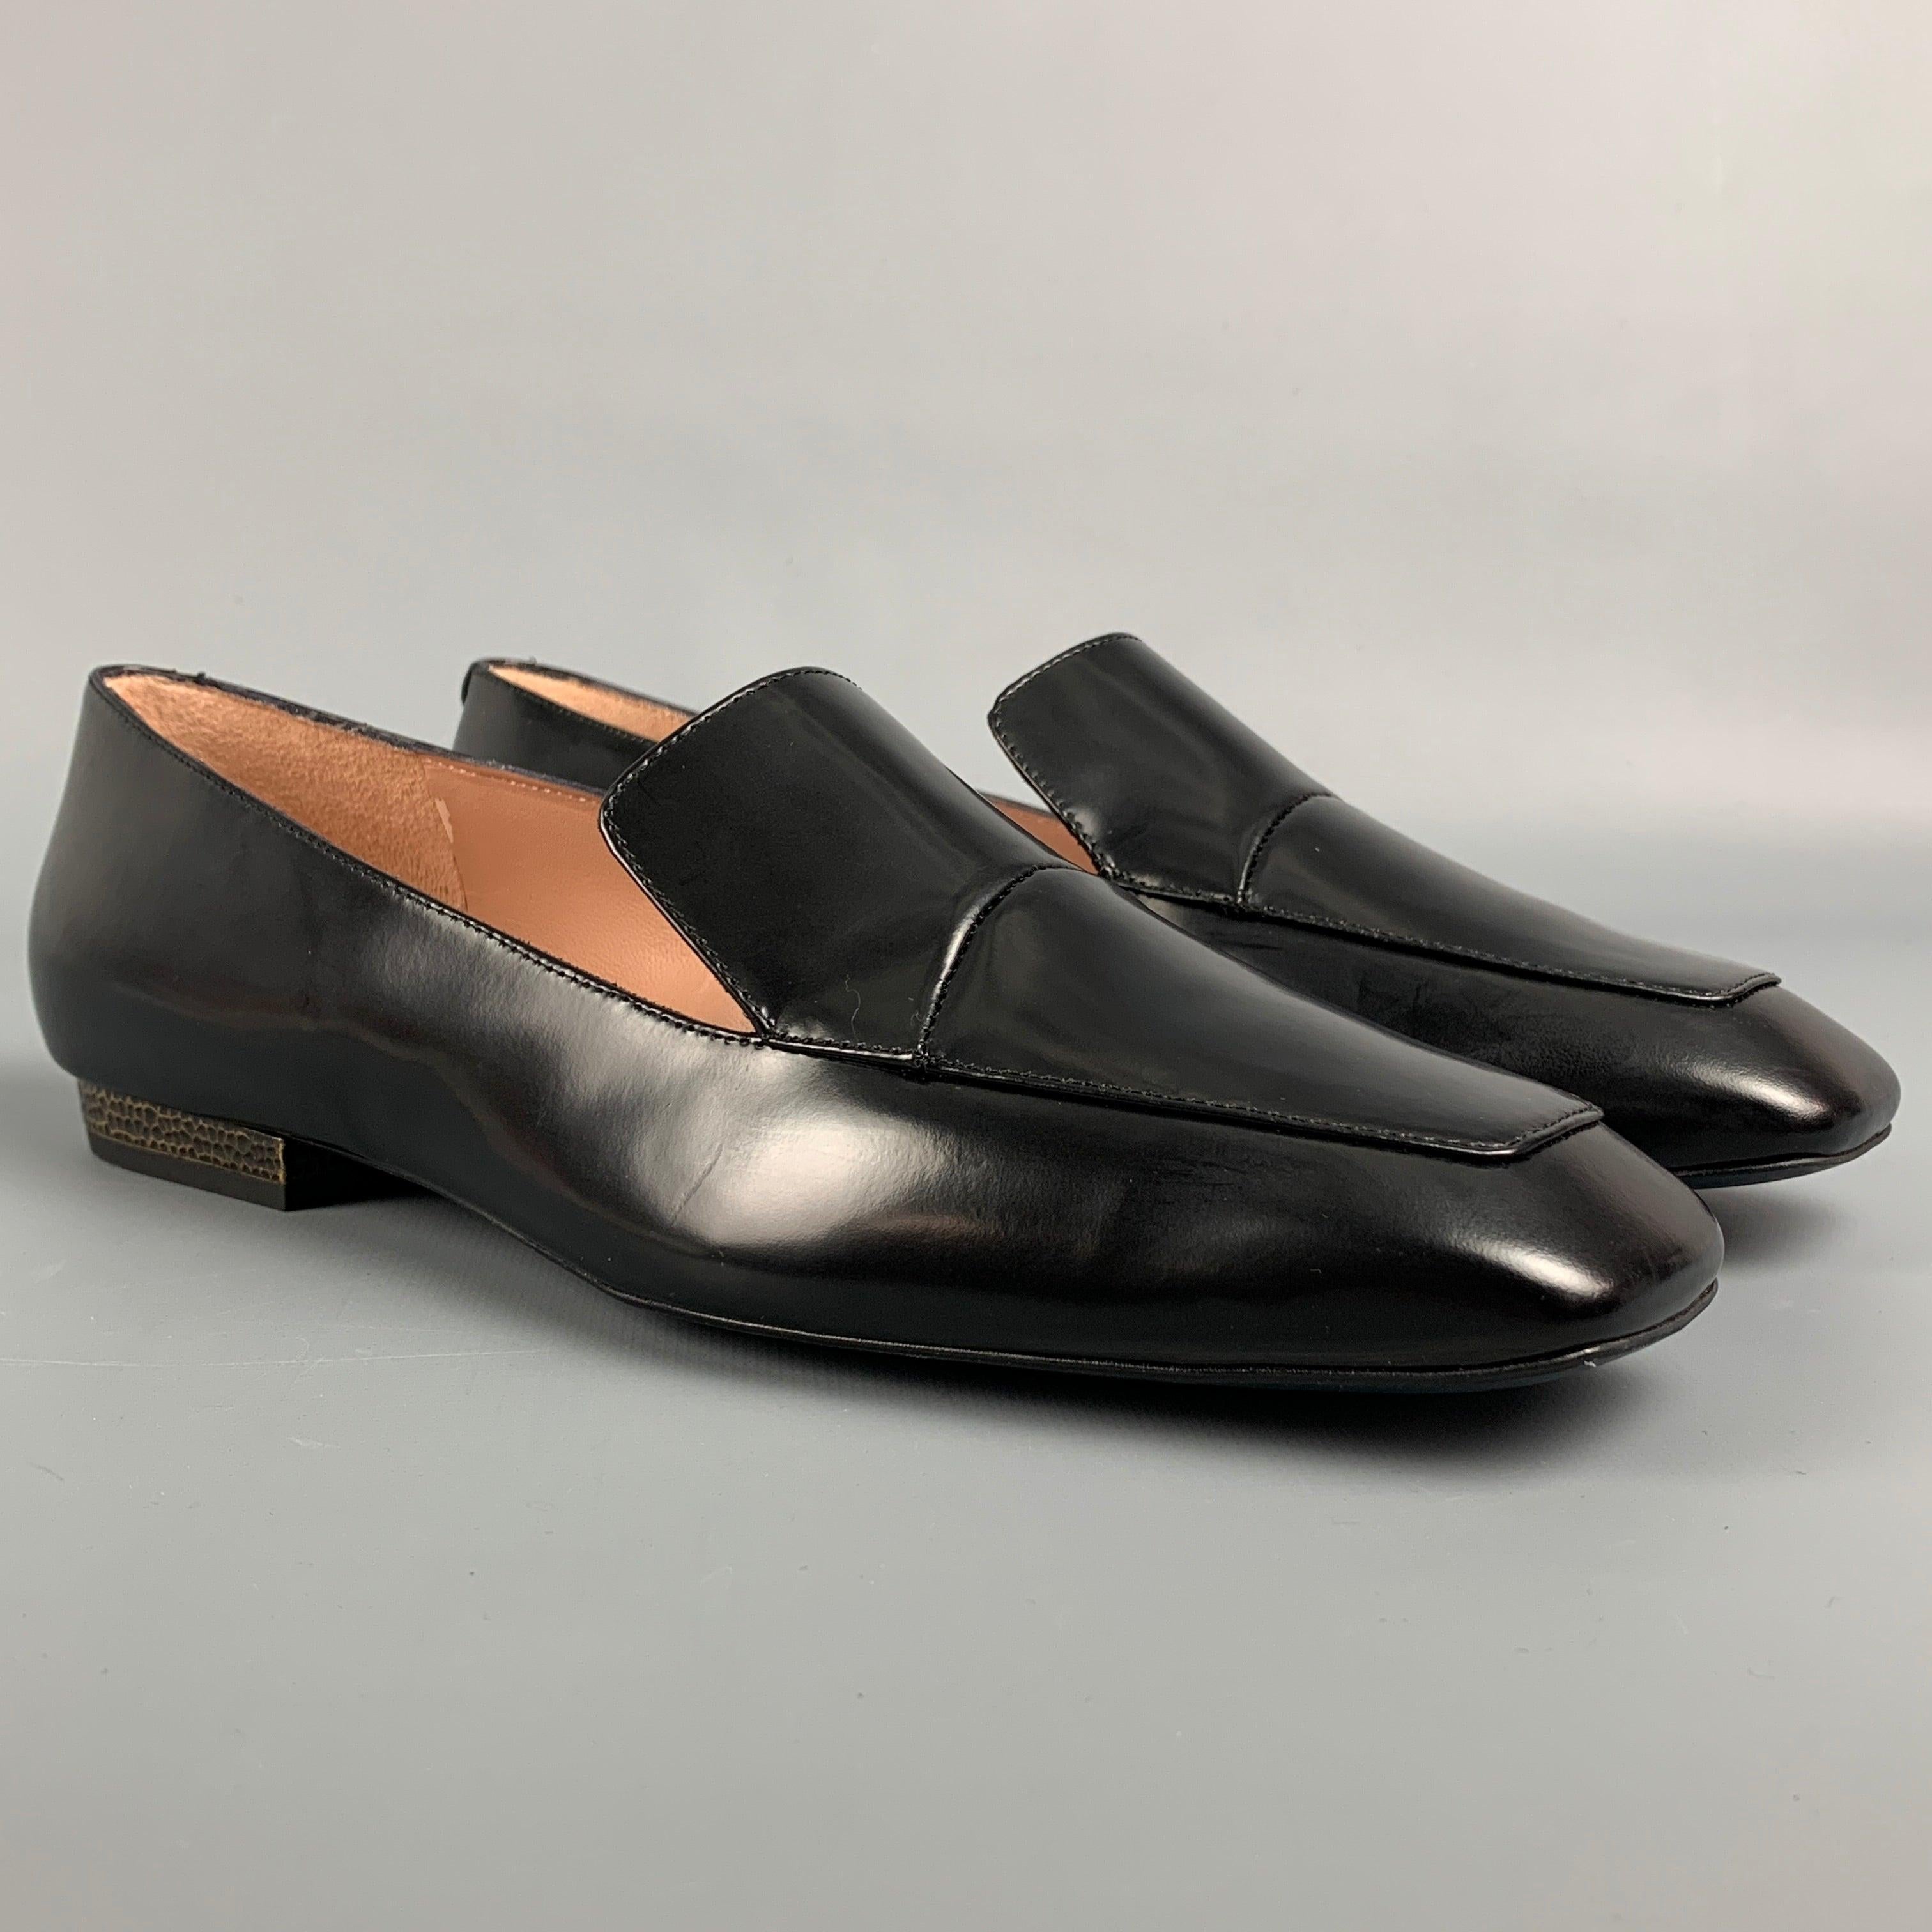 JIL SANDER Navy flats comes in a black leather featuring a slip on style and a square toe. Made in Italy.
 New With Box.
  
 

 Marked:  38.5Outsole: 10 inches x 3 inches 
  
  
  
 Sui Generis Reference: 111430
 Category: Flats
 More Details
  
